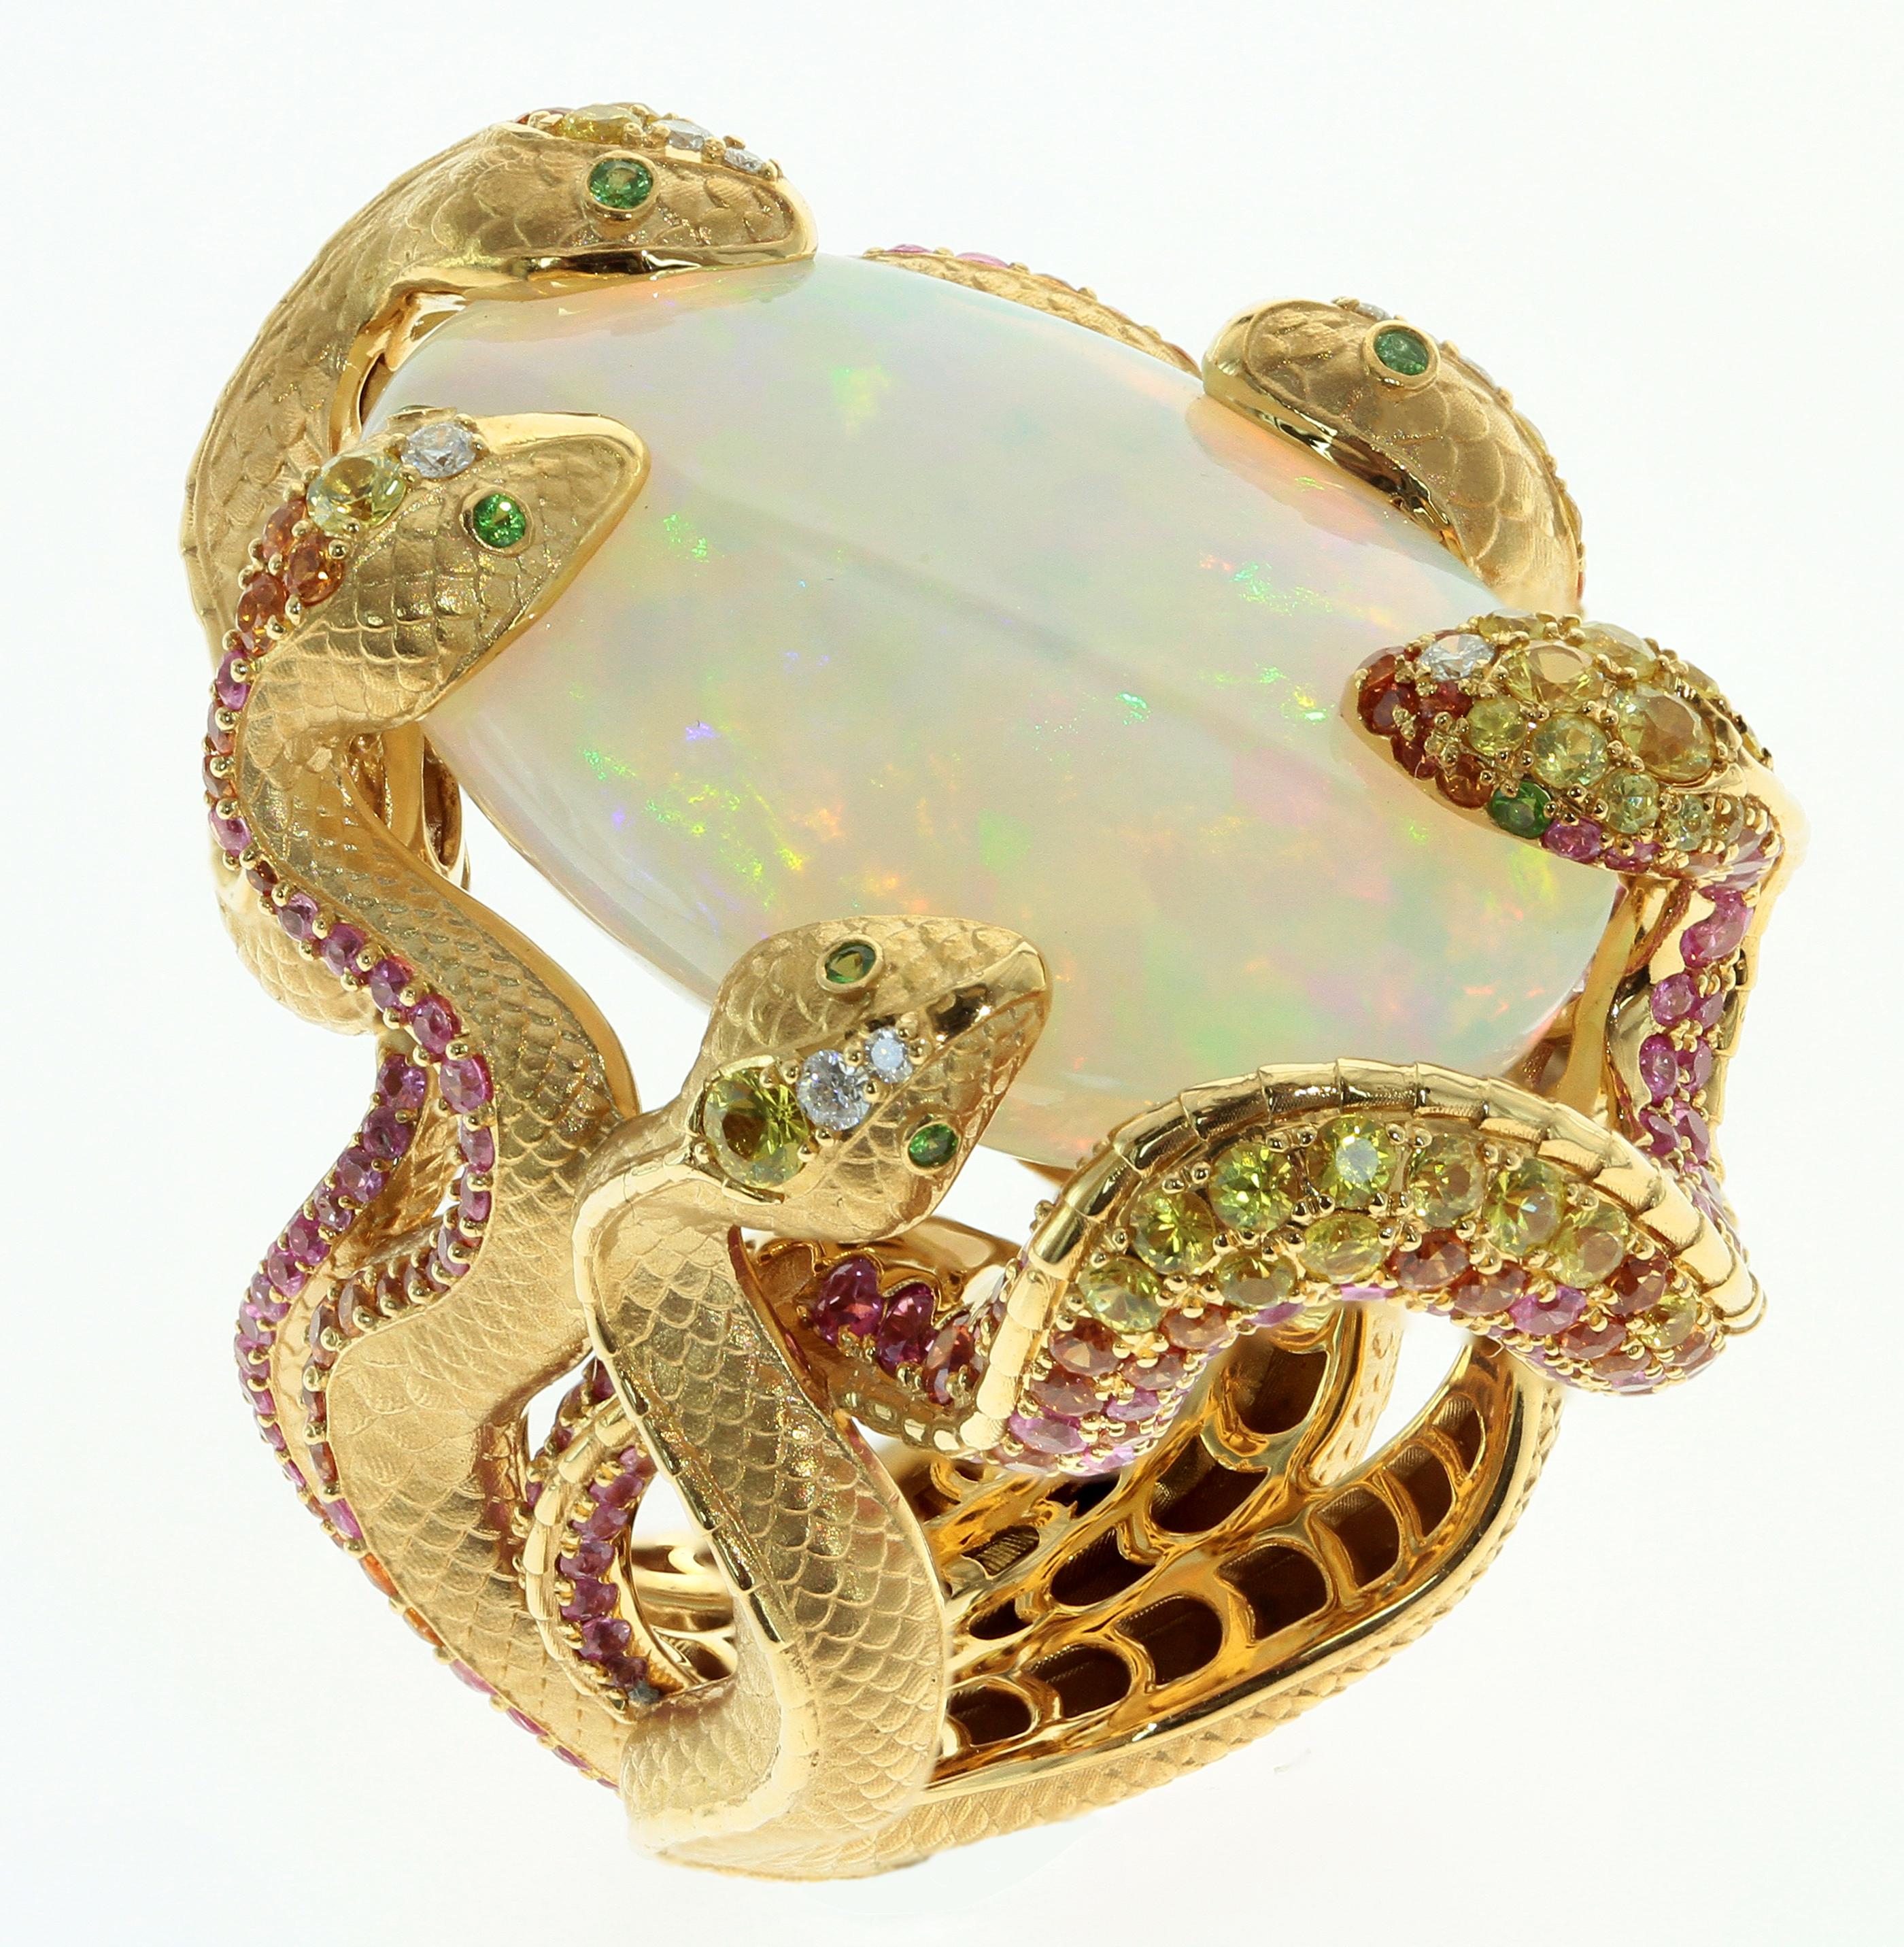 26.33 Carat Opal surrounded by Diamonds, Pink and Yellow Sapphire. Five gorgeous Snake guard the opal in this Ring

27x39x34.6 mm
32.95 gm

US Size 8.0
EU Size 56.5